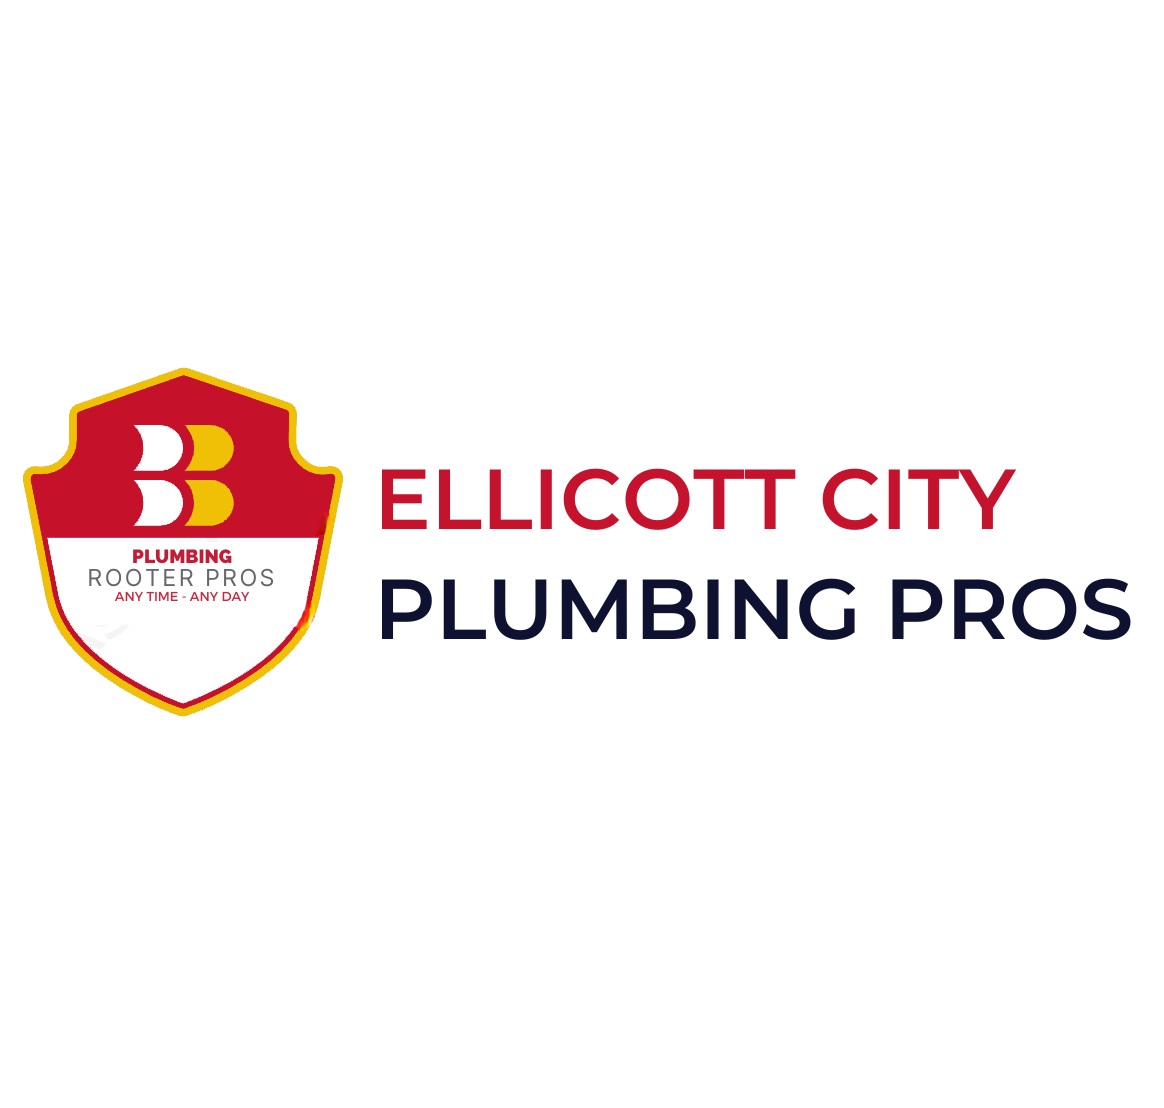 Ellicott City Plumbing, Drain and Rooter Pros